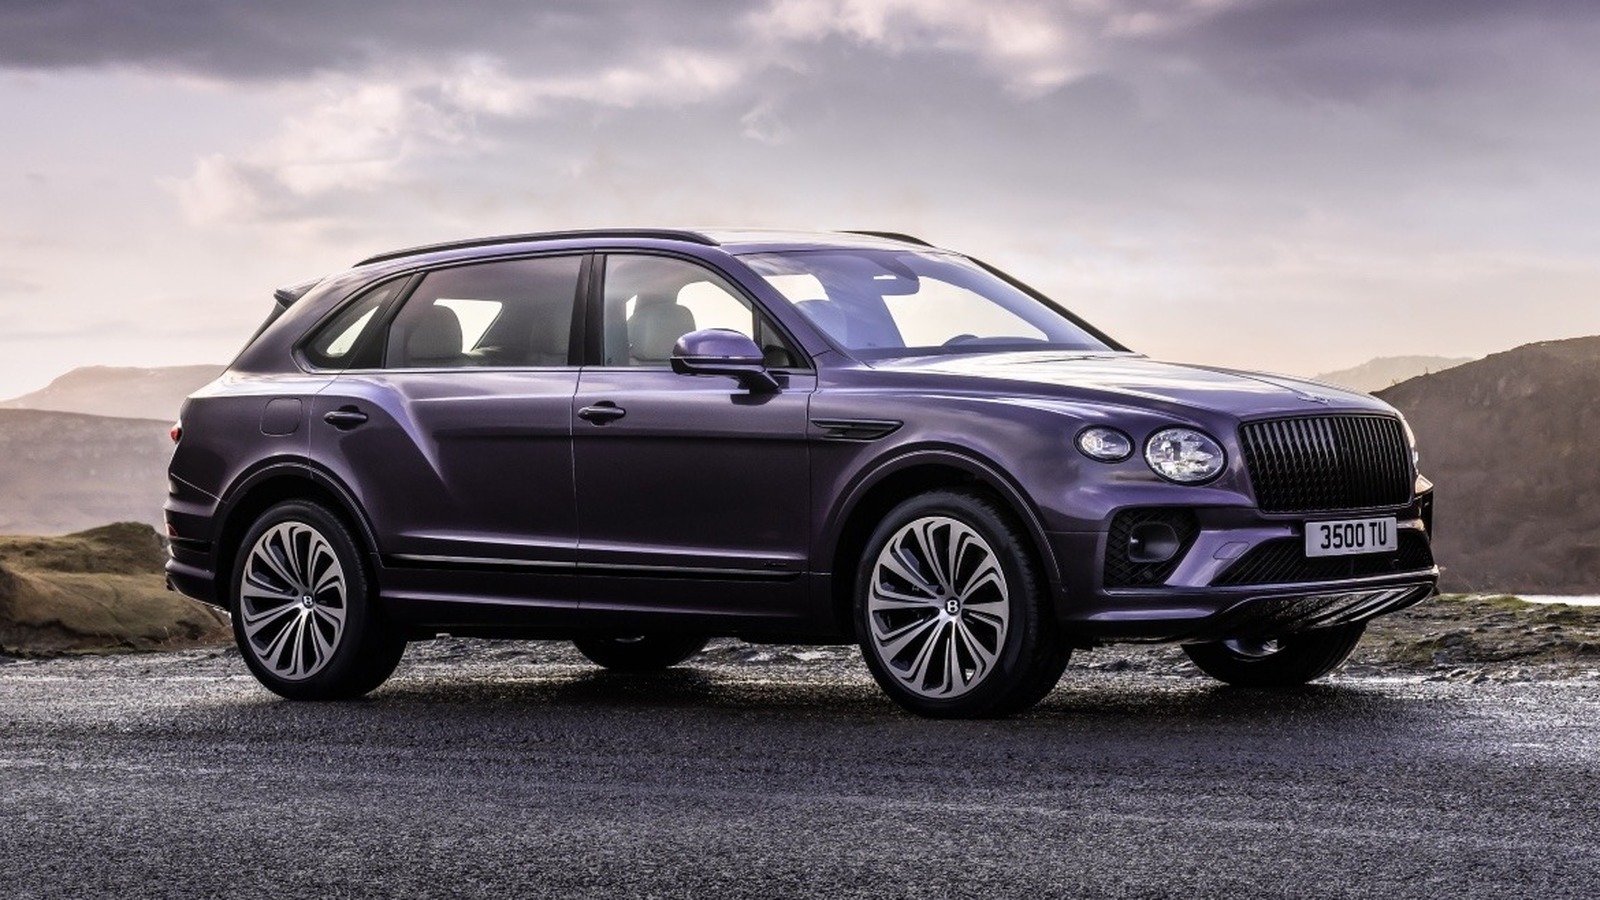 10 Most Luxurious Features Of The New Bentley Bentayga EWB